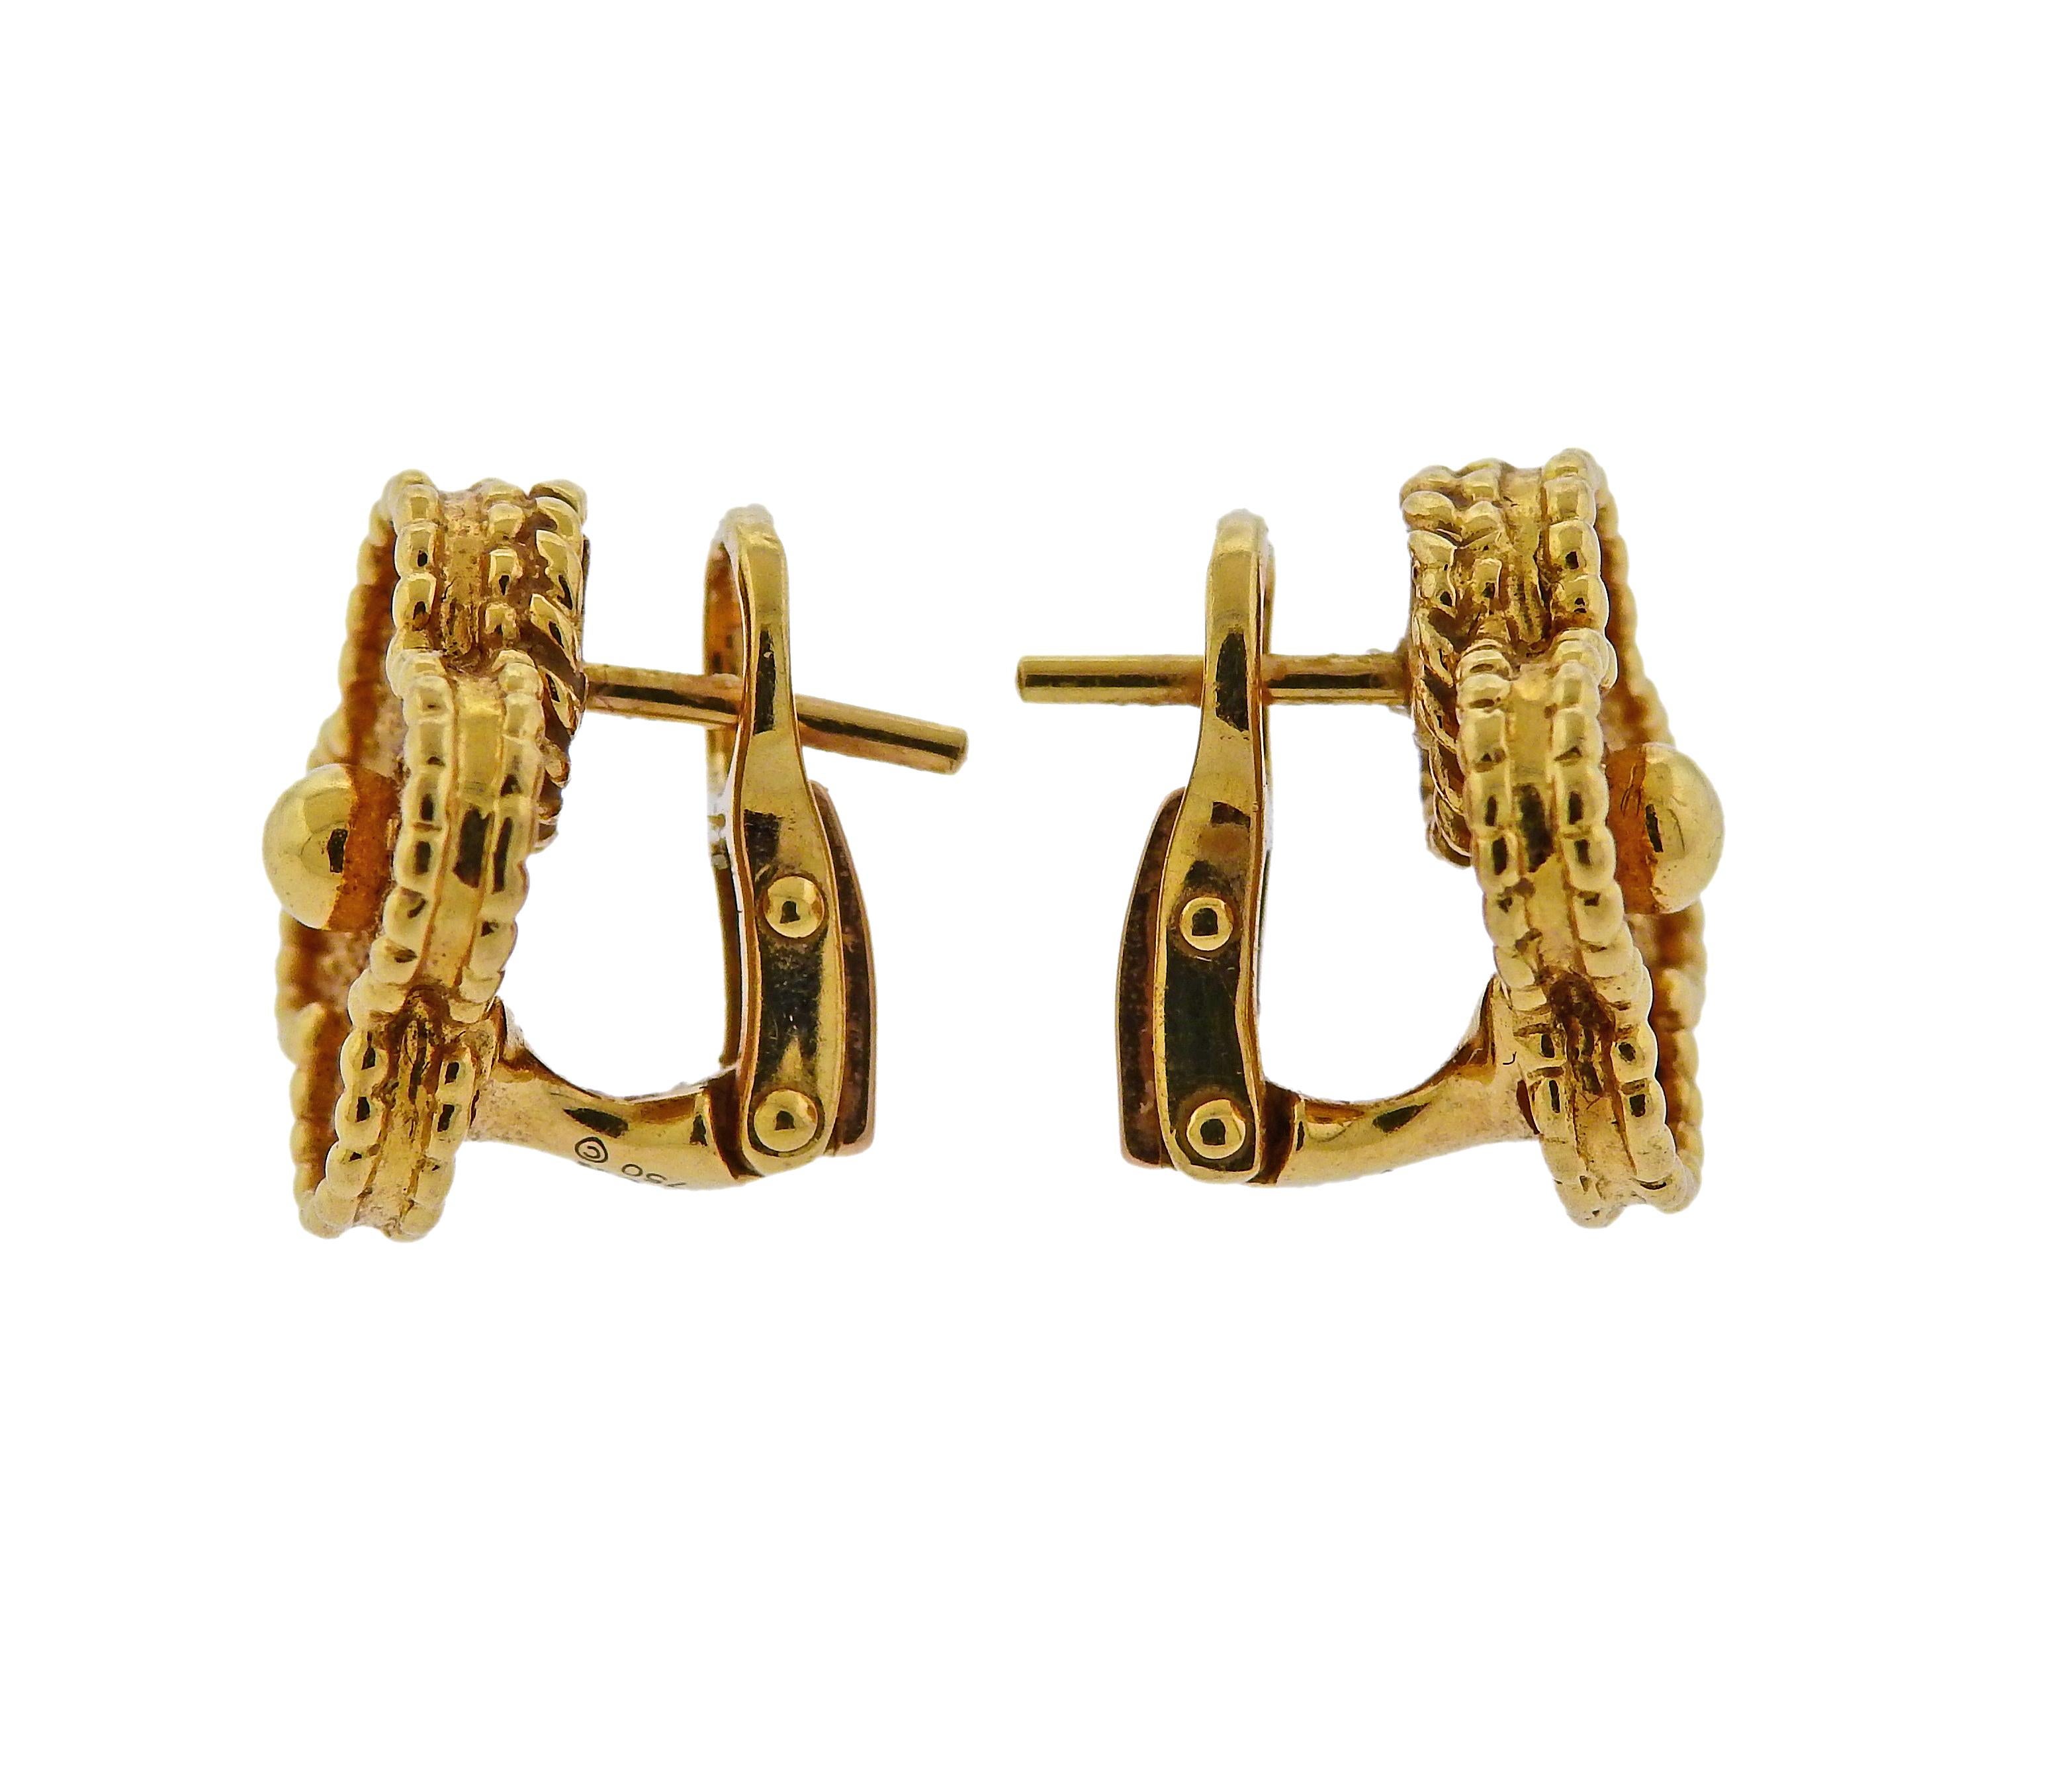 Pair of 18k yellow gold earrings crafted by Van Cleef and Arpels. Earrings measure 15mm X 15mm and weigh 8.7 grams. Marked CL 74***, VCA 750.